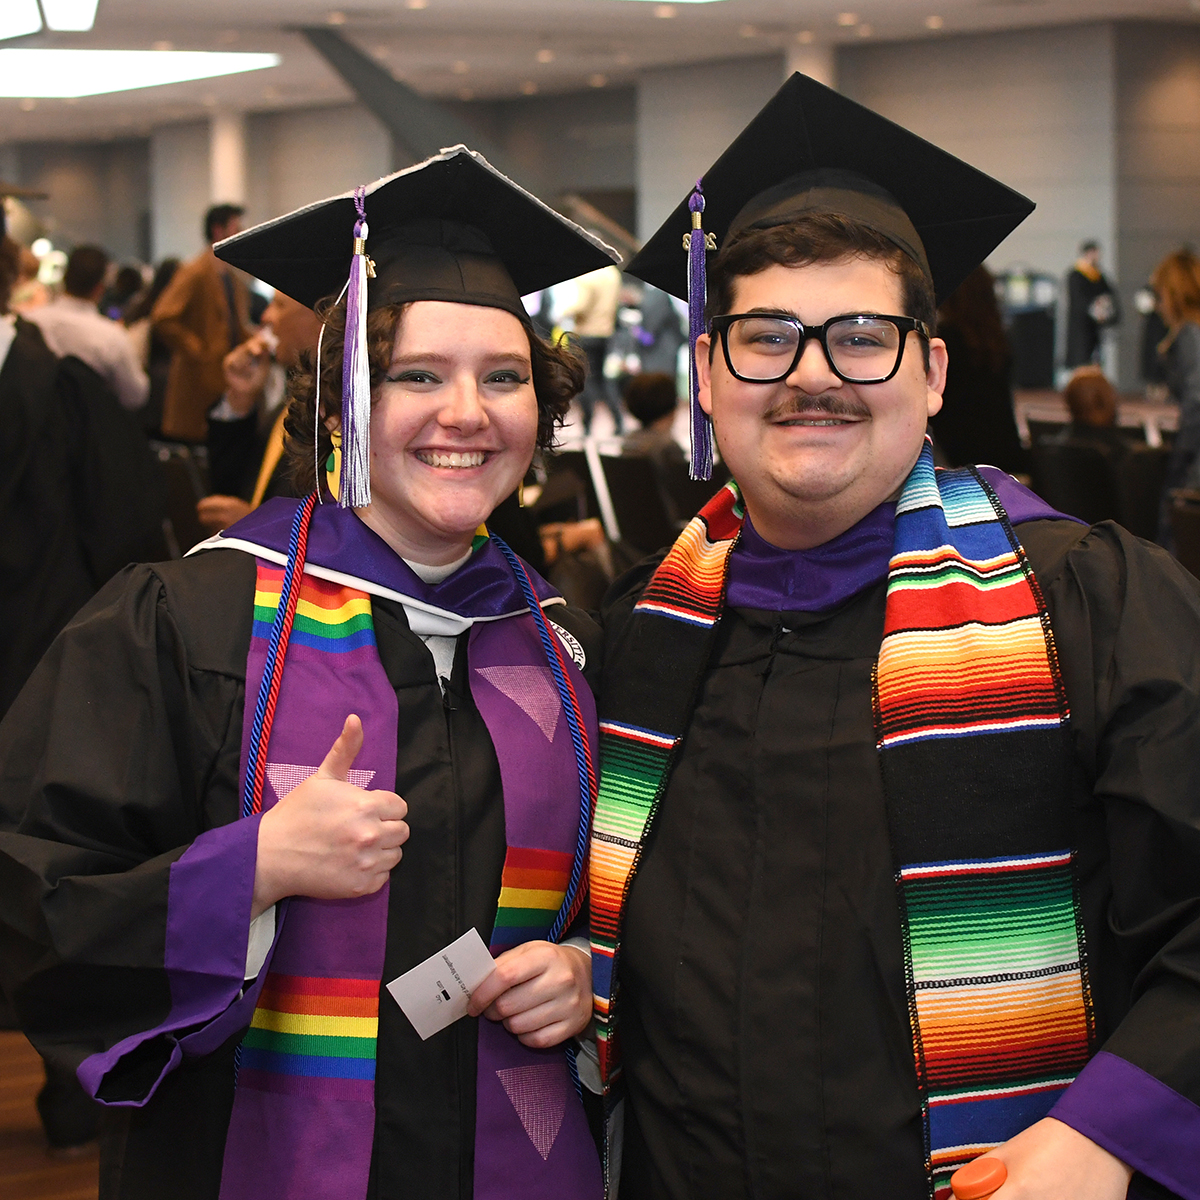 Two graduating students in caps and gowns pose for a photo, smiling